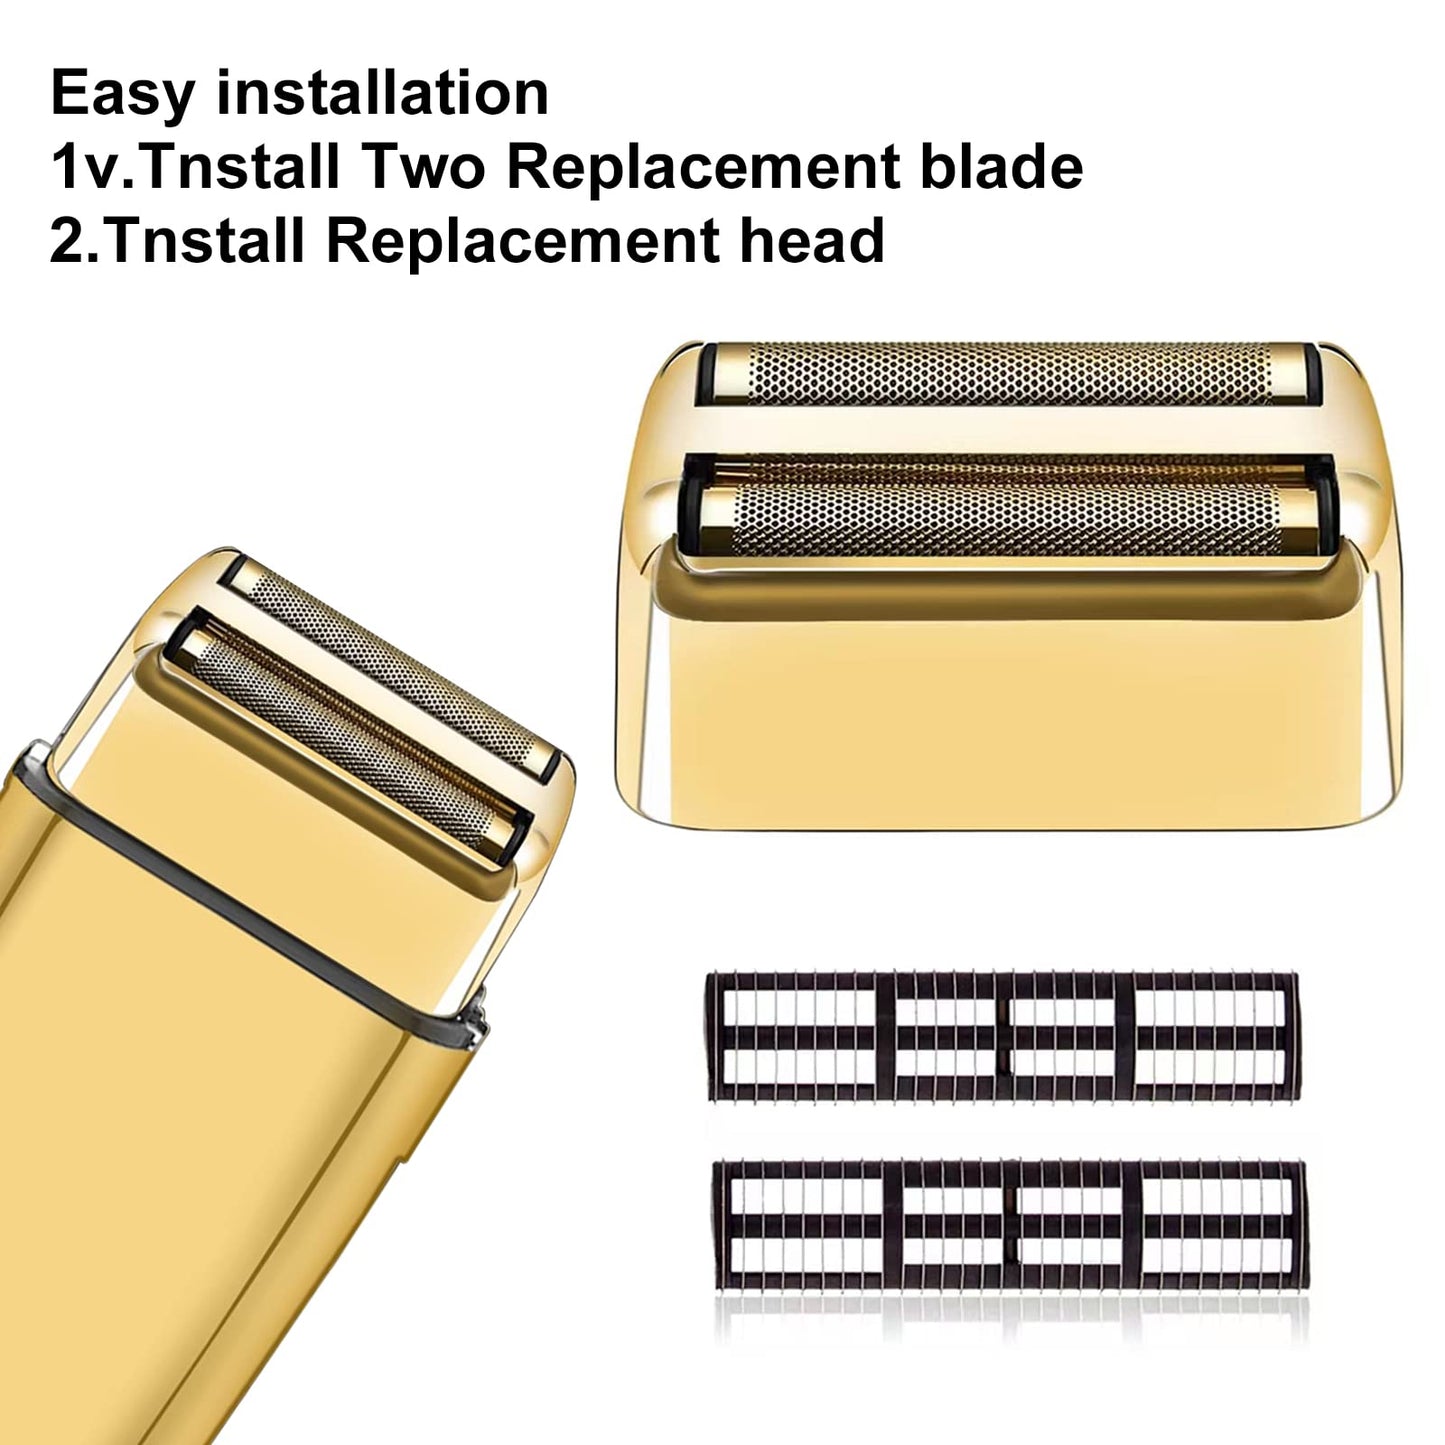 2 pack Professional Replacement Foil and Cutters for BaBylissPRO Barberology Double Foil Shaver, Compatible with BaBylissPRO Barberology FXFS2 Shaver，Gold